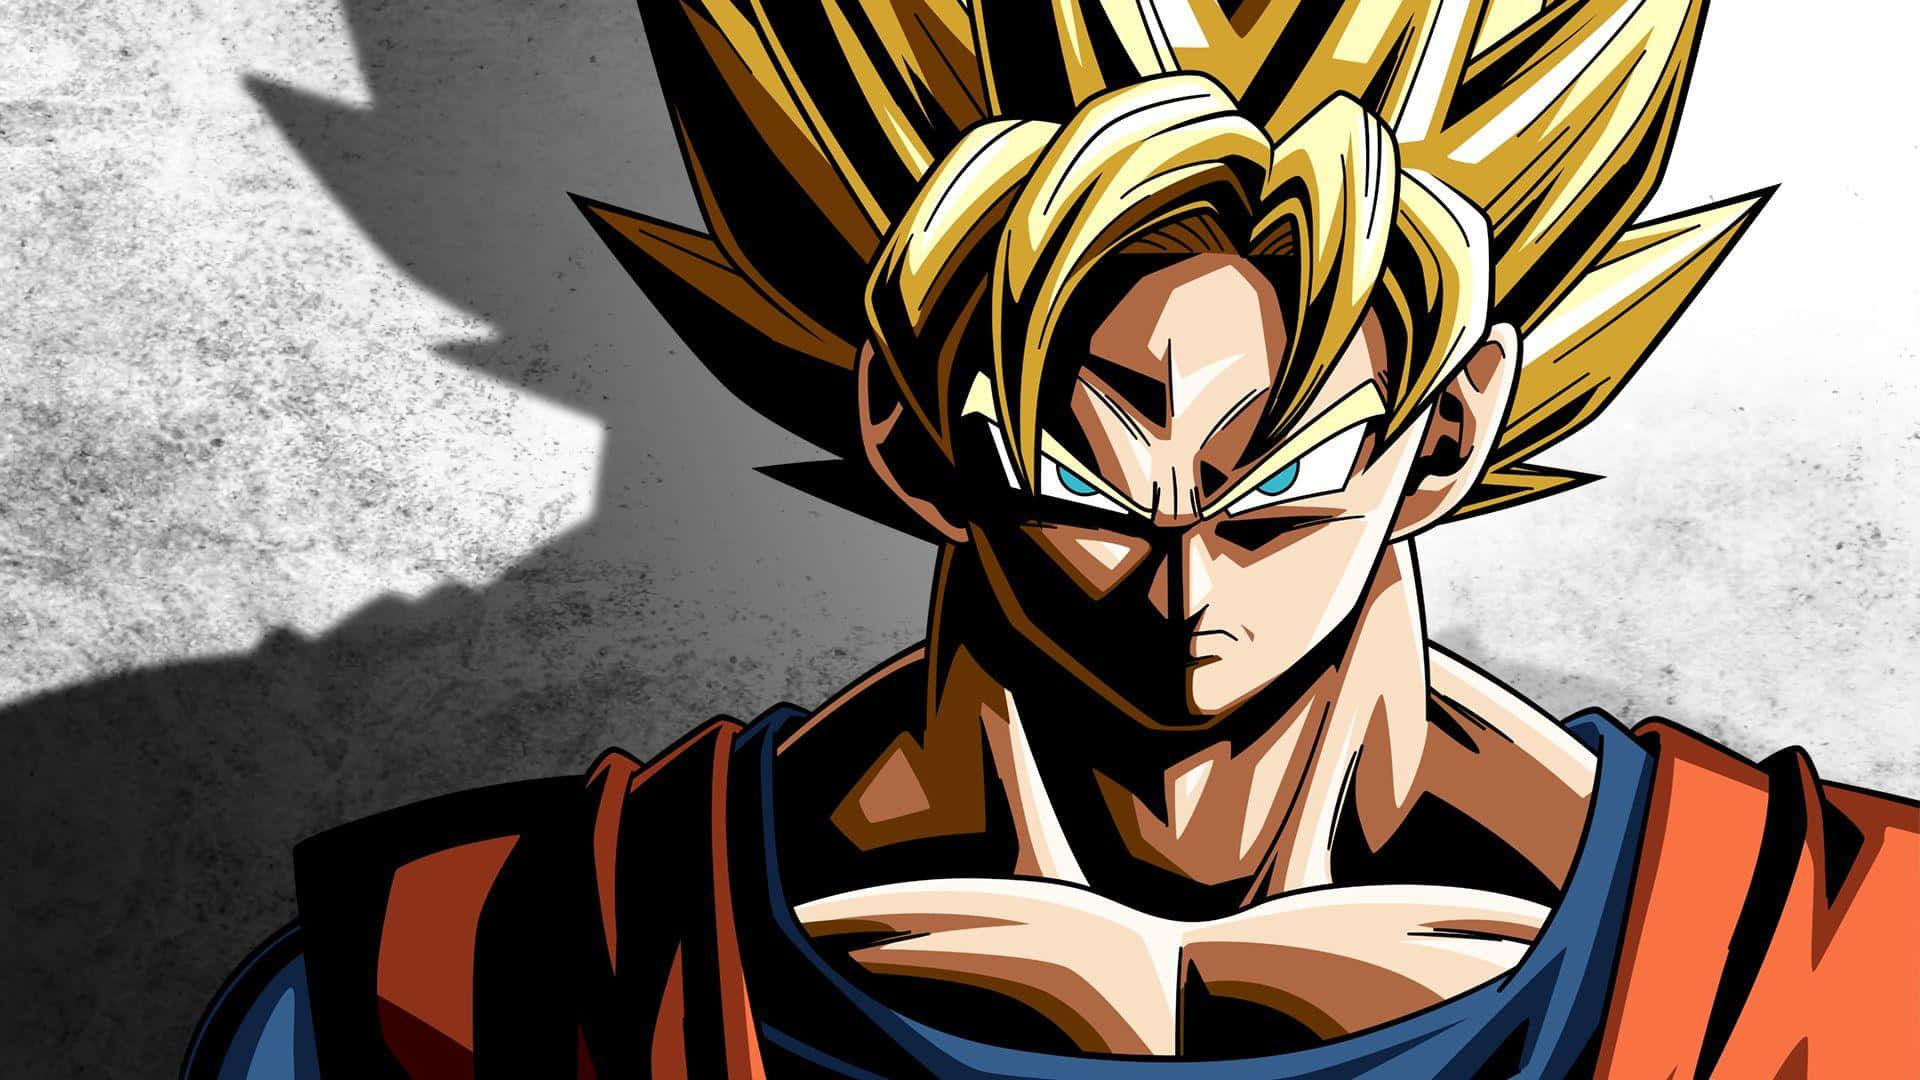 Goku is ready to take on the world in Dragon Ball Xenoverse Wallpaper